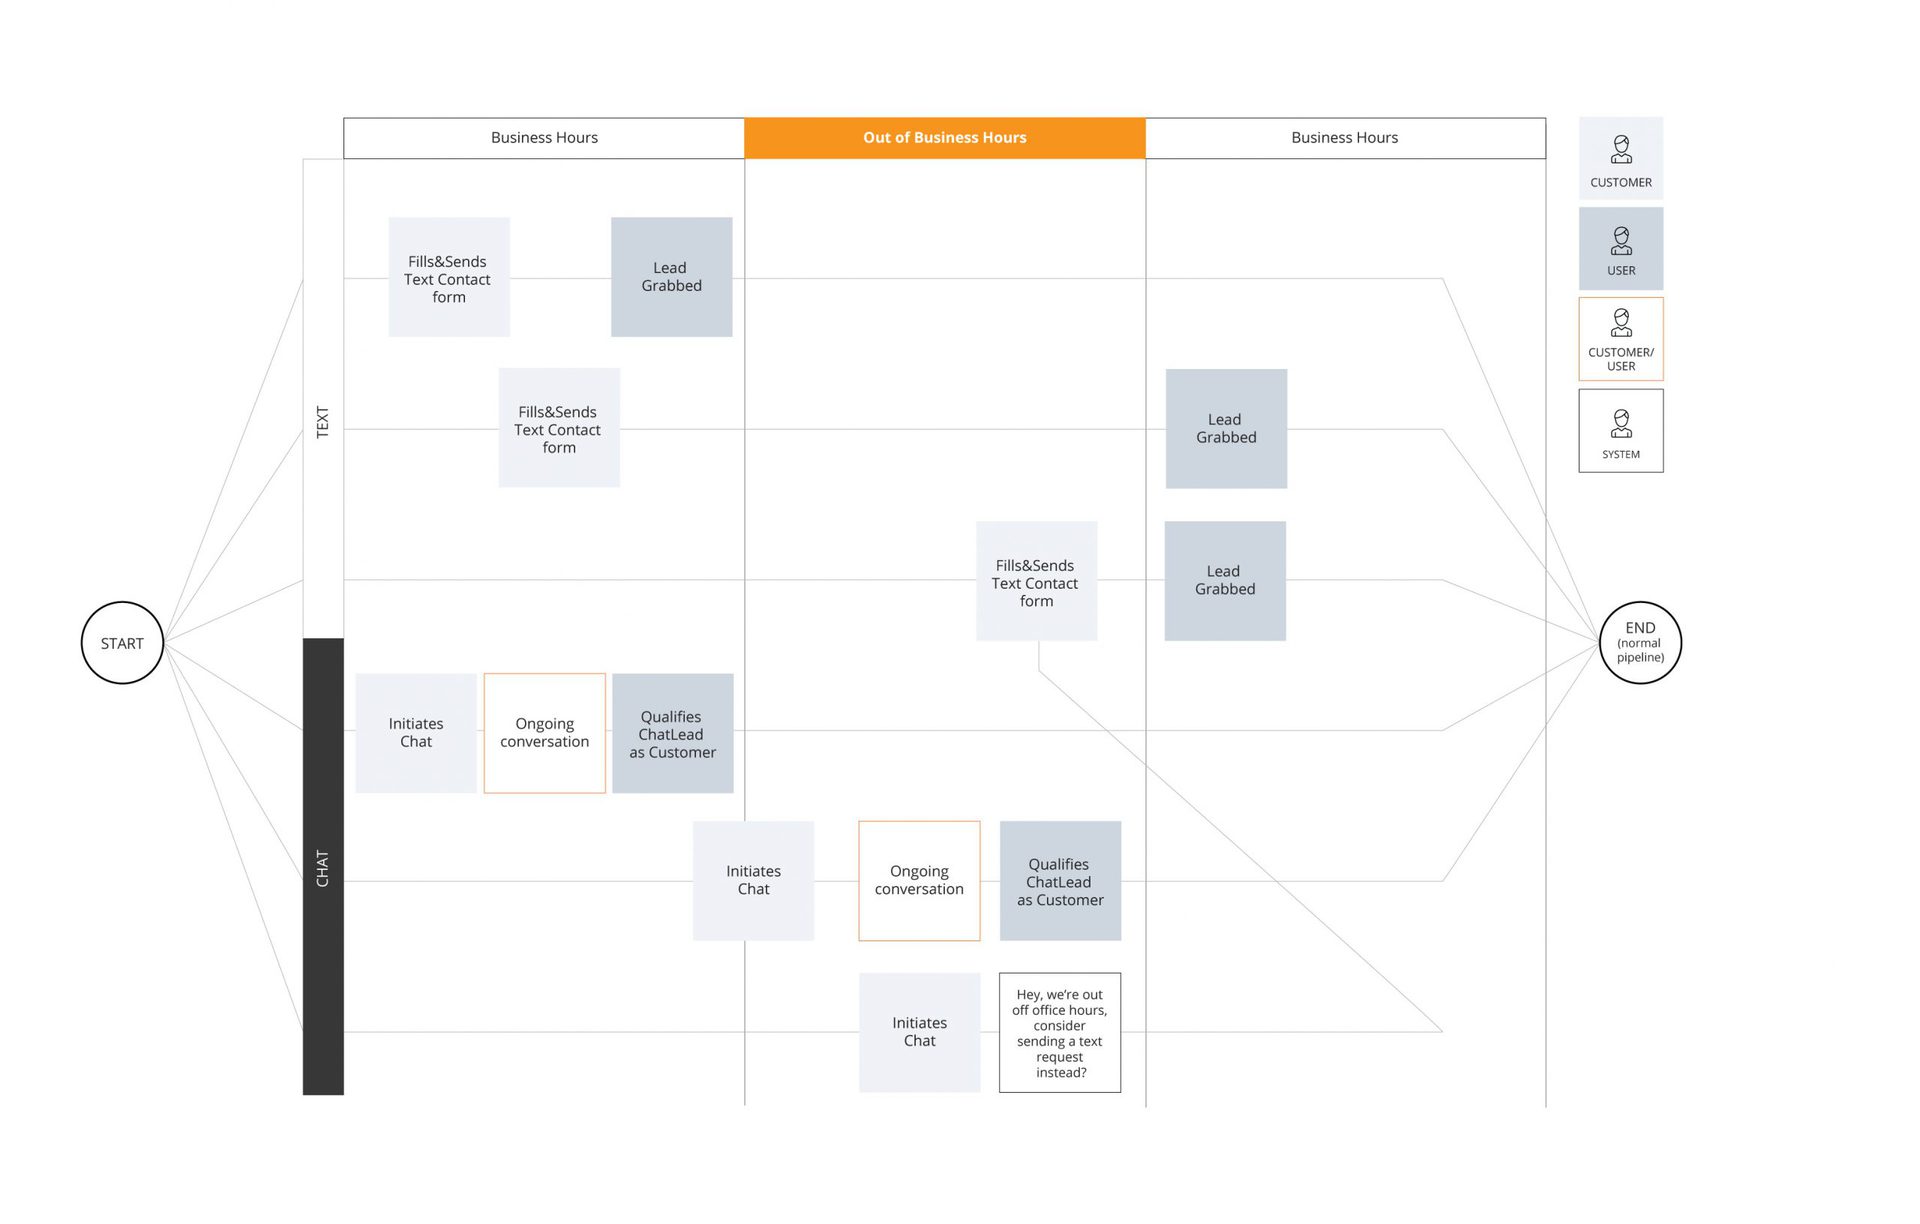 Why do we need business process mapping?